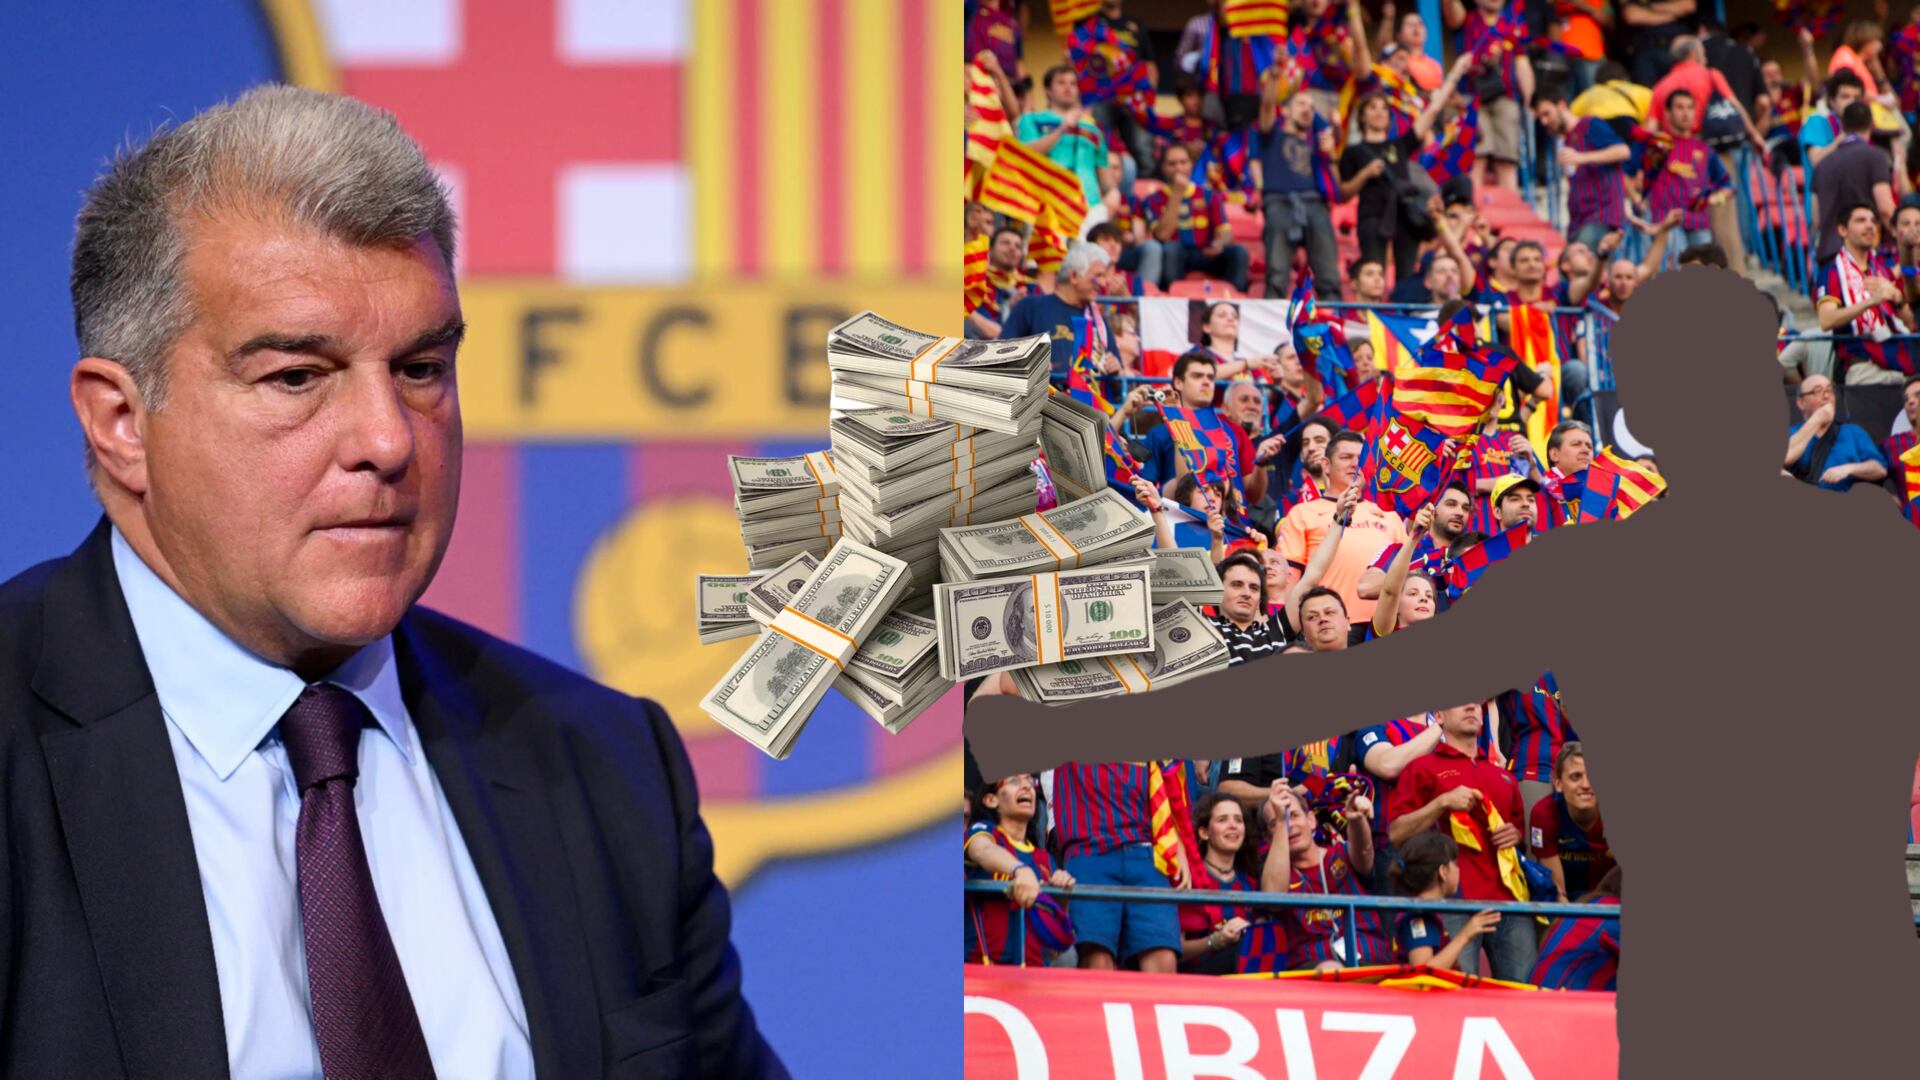 Worst news for Barcelona, the star player that could leave this summer for $109M